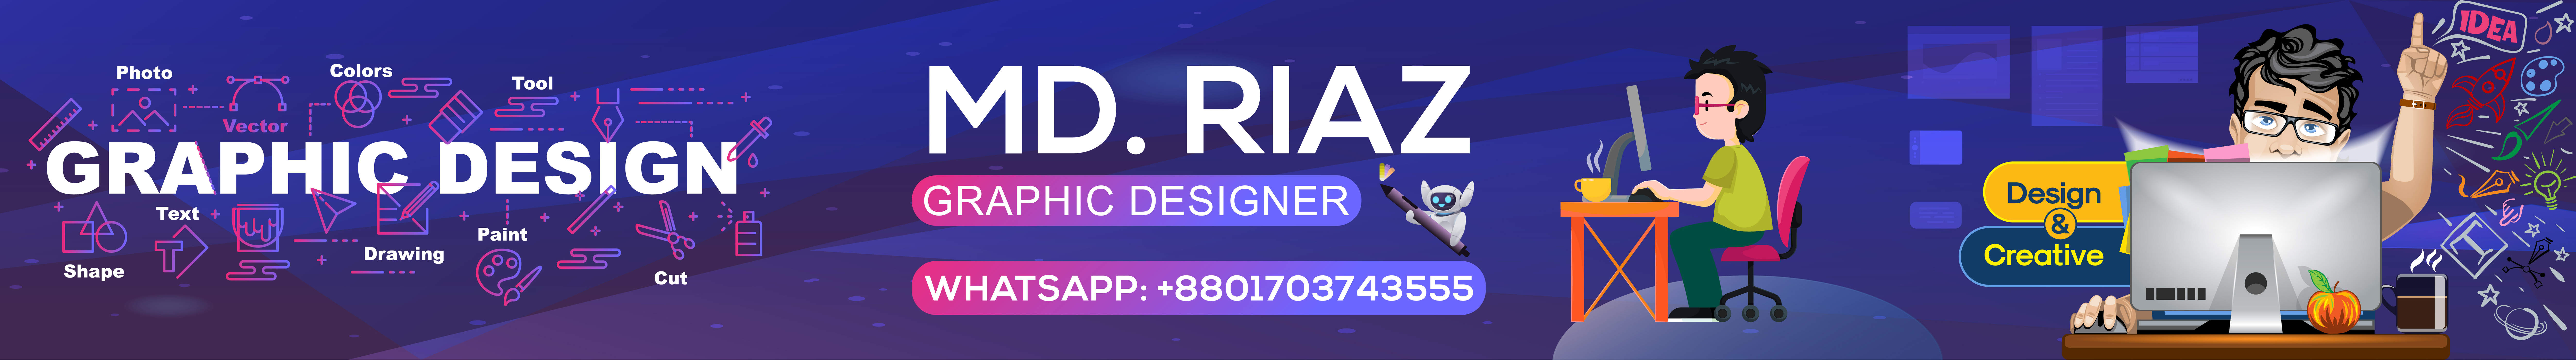 Md. Riaz's profile banner